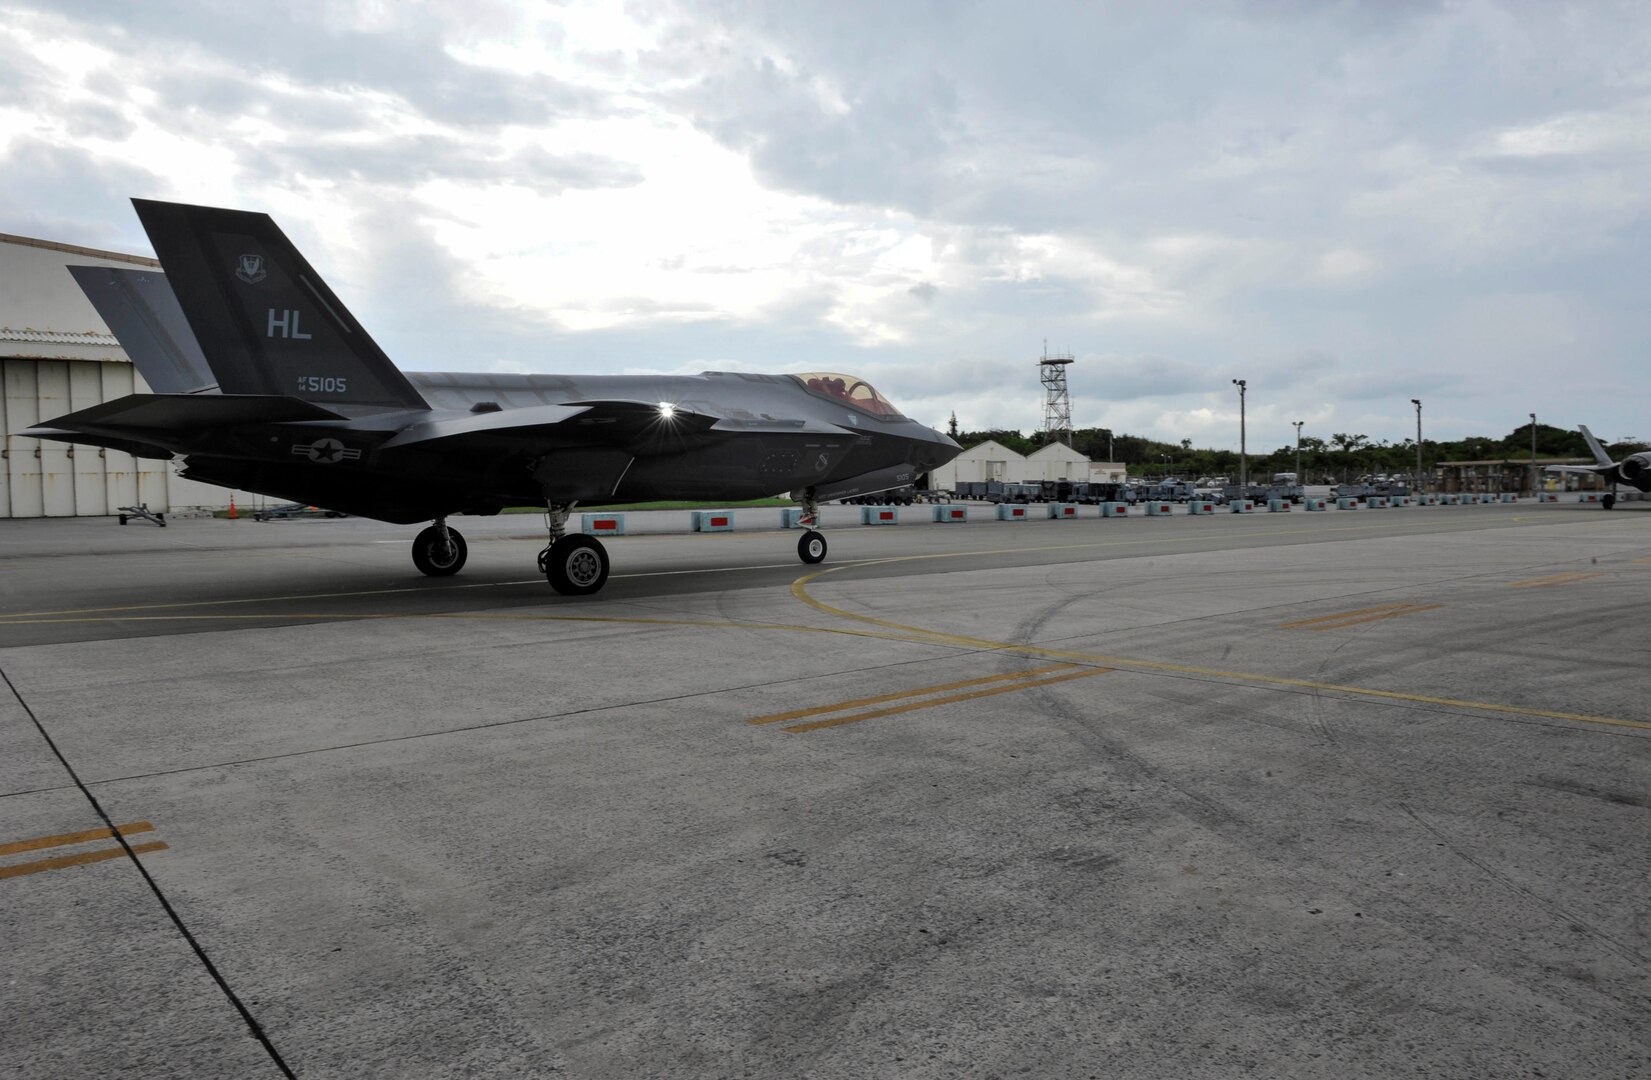 A U.S. Air Force F-35A Lightning II from Hill Air Force Base, Utah, taxis for take-off at Kadena Air Base, Japan, Nov. 16, 2017. Approximately 300 Airmen and 12 F-35A Lightning II stealth fighters from Hill AFB, 388th and 419th Fighter Wings arrived to Kadena AB for a six-month deployment that's part of Pacific Command's "theater security" program.